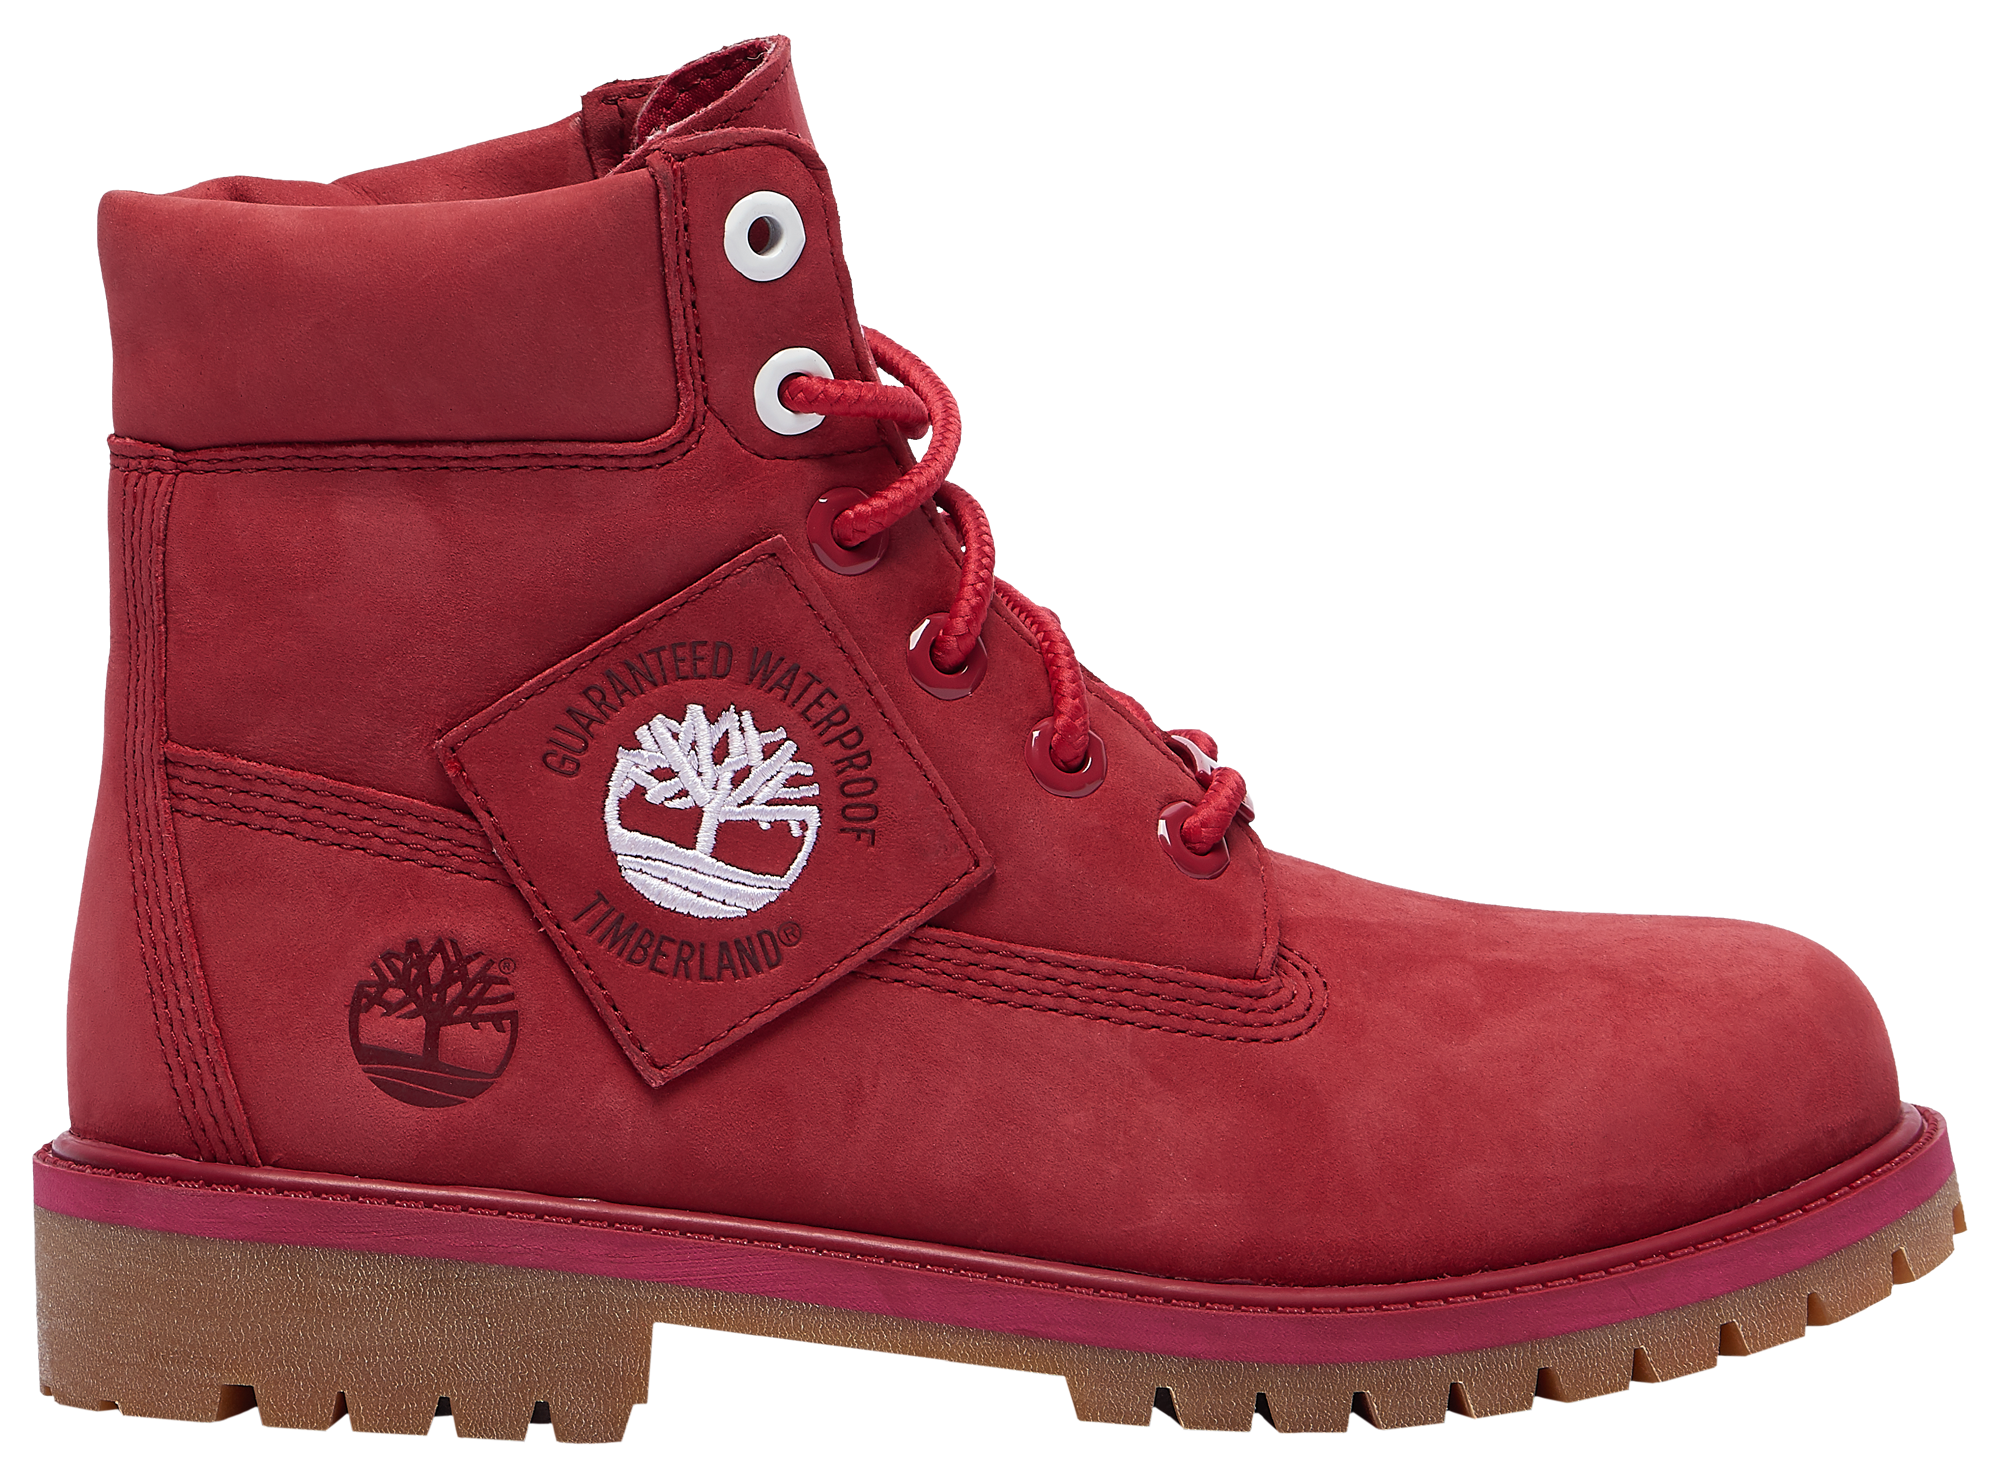 are timberlands good walking boots